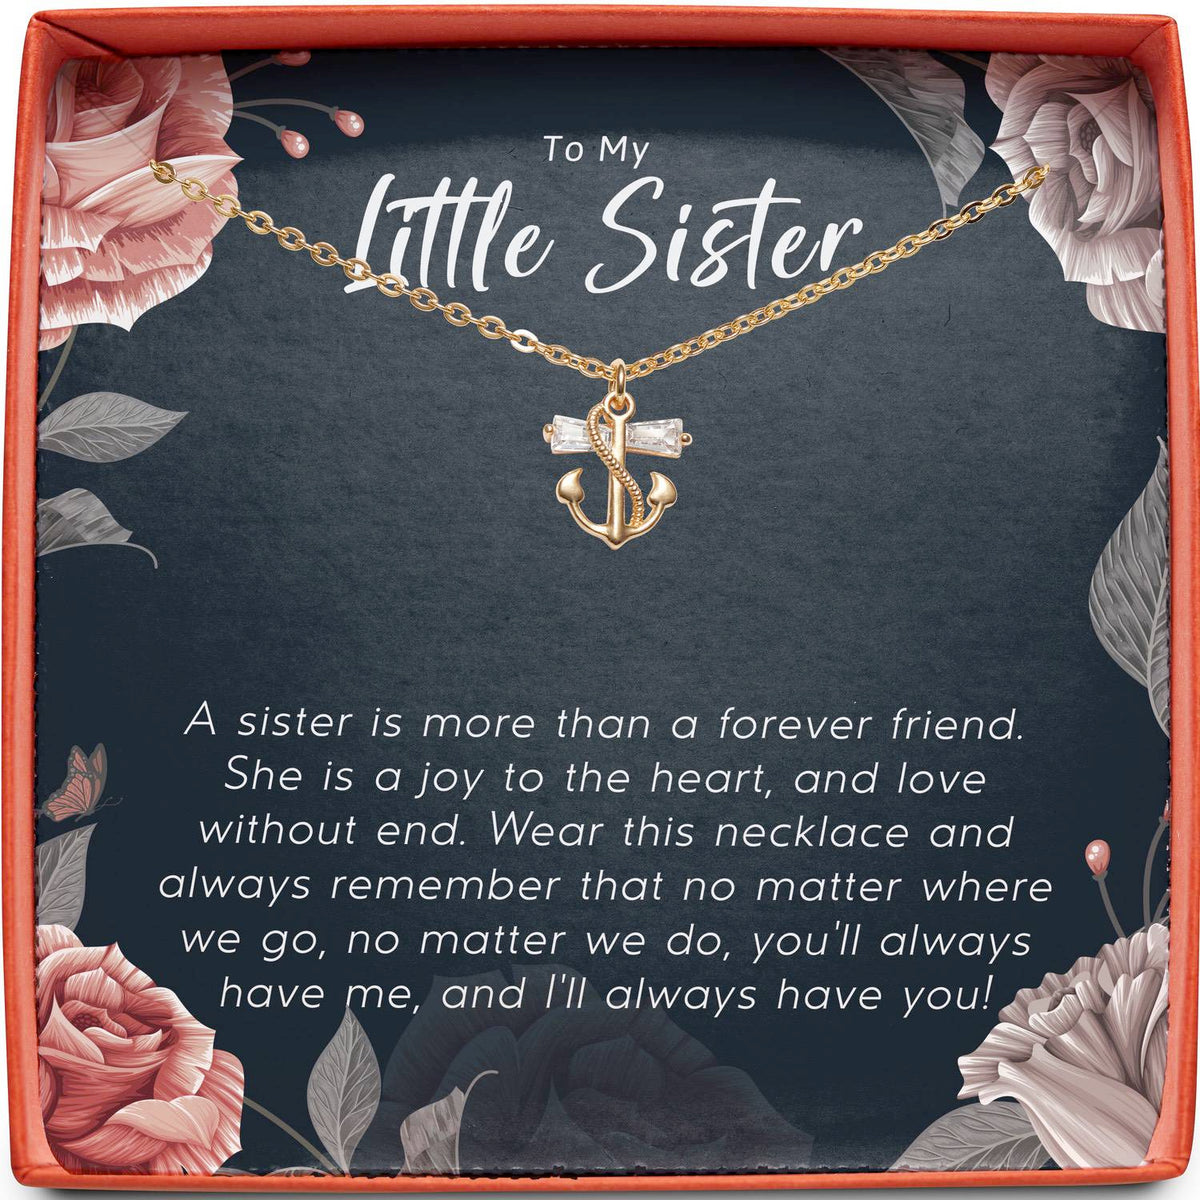 To My Little Sister | More Than a Forever Friend | Anchor Necklace